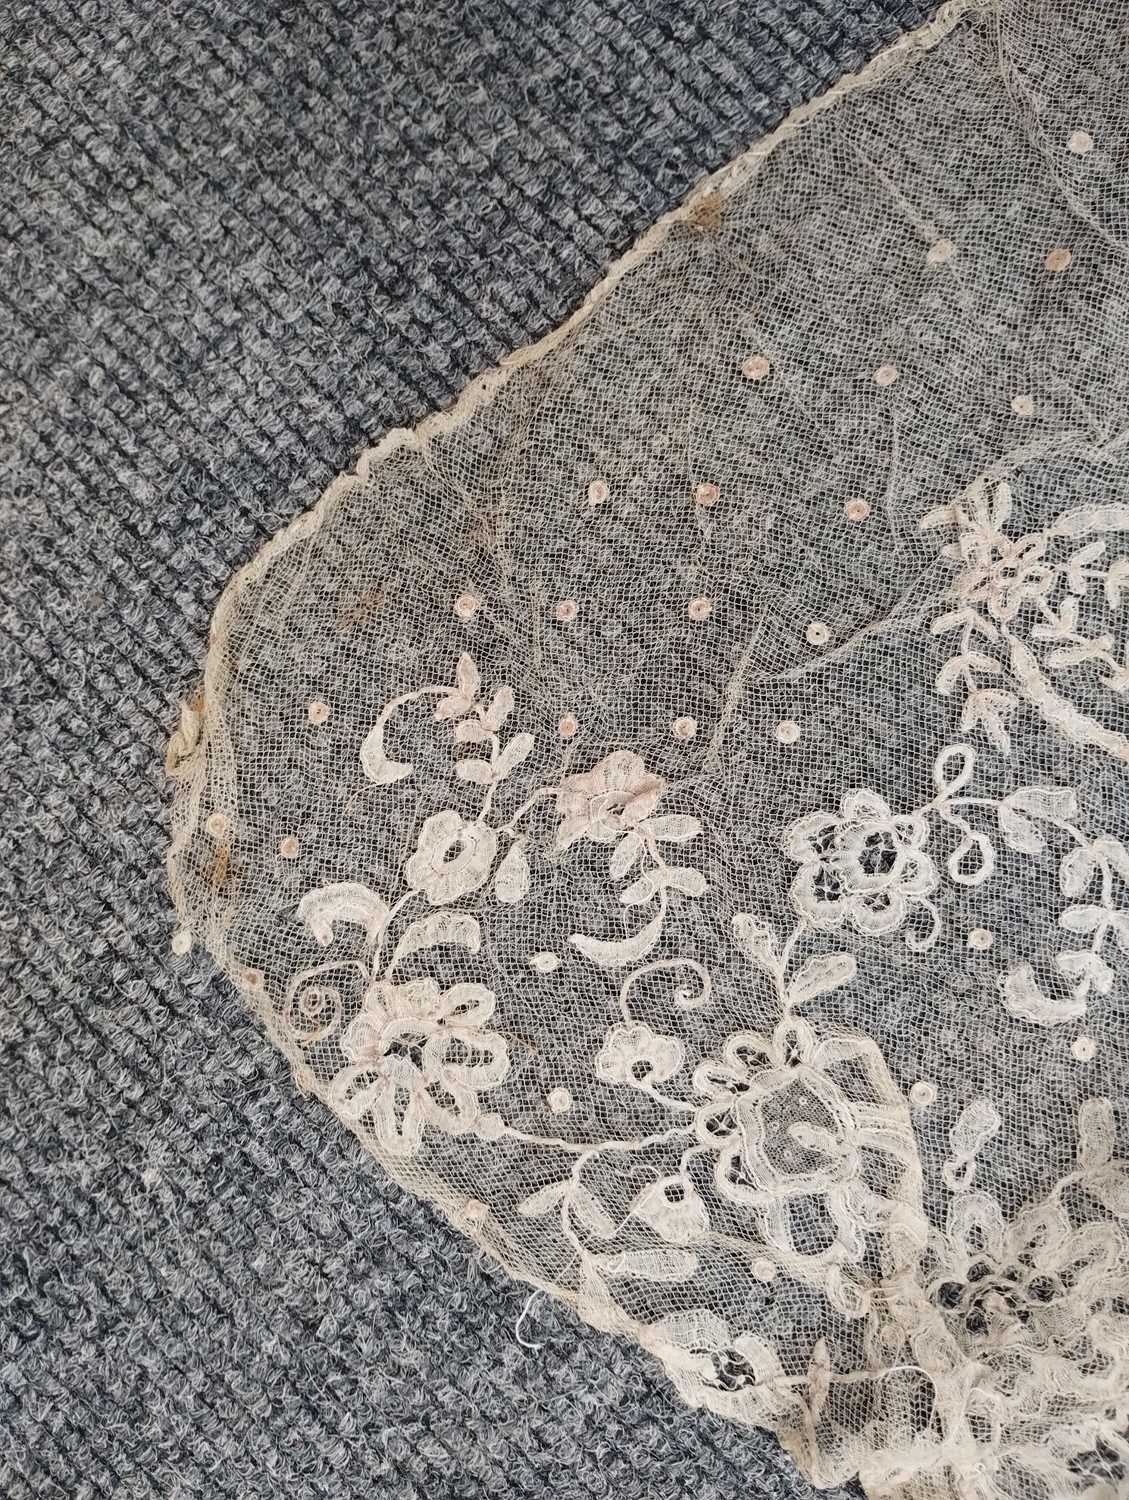 Early 20th Century Lace comprising a flounce with appliquéd flower heads and motifs within a - Image 27 of 32